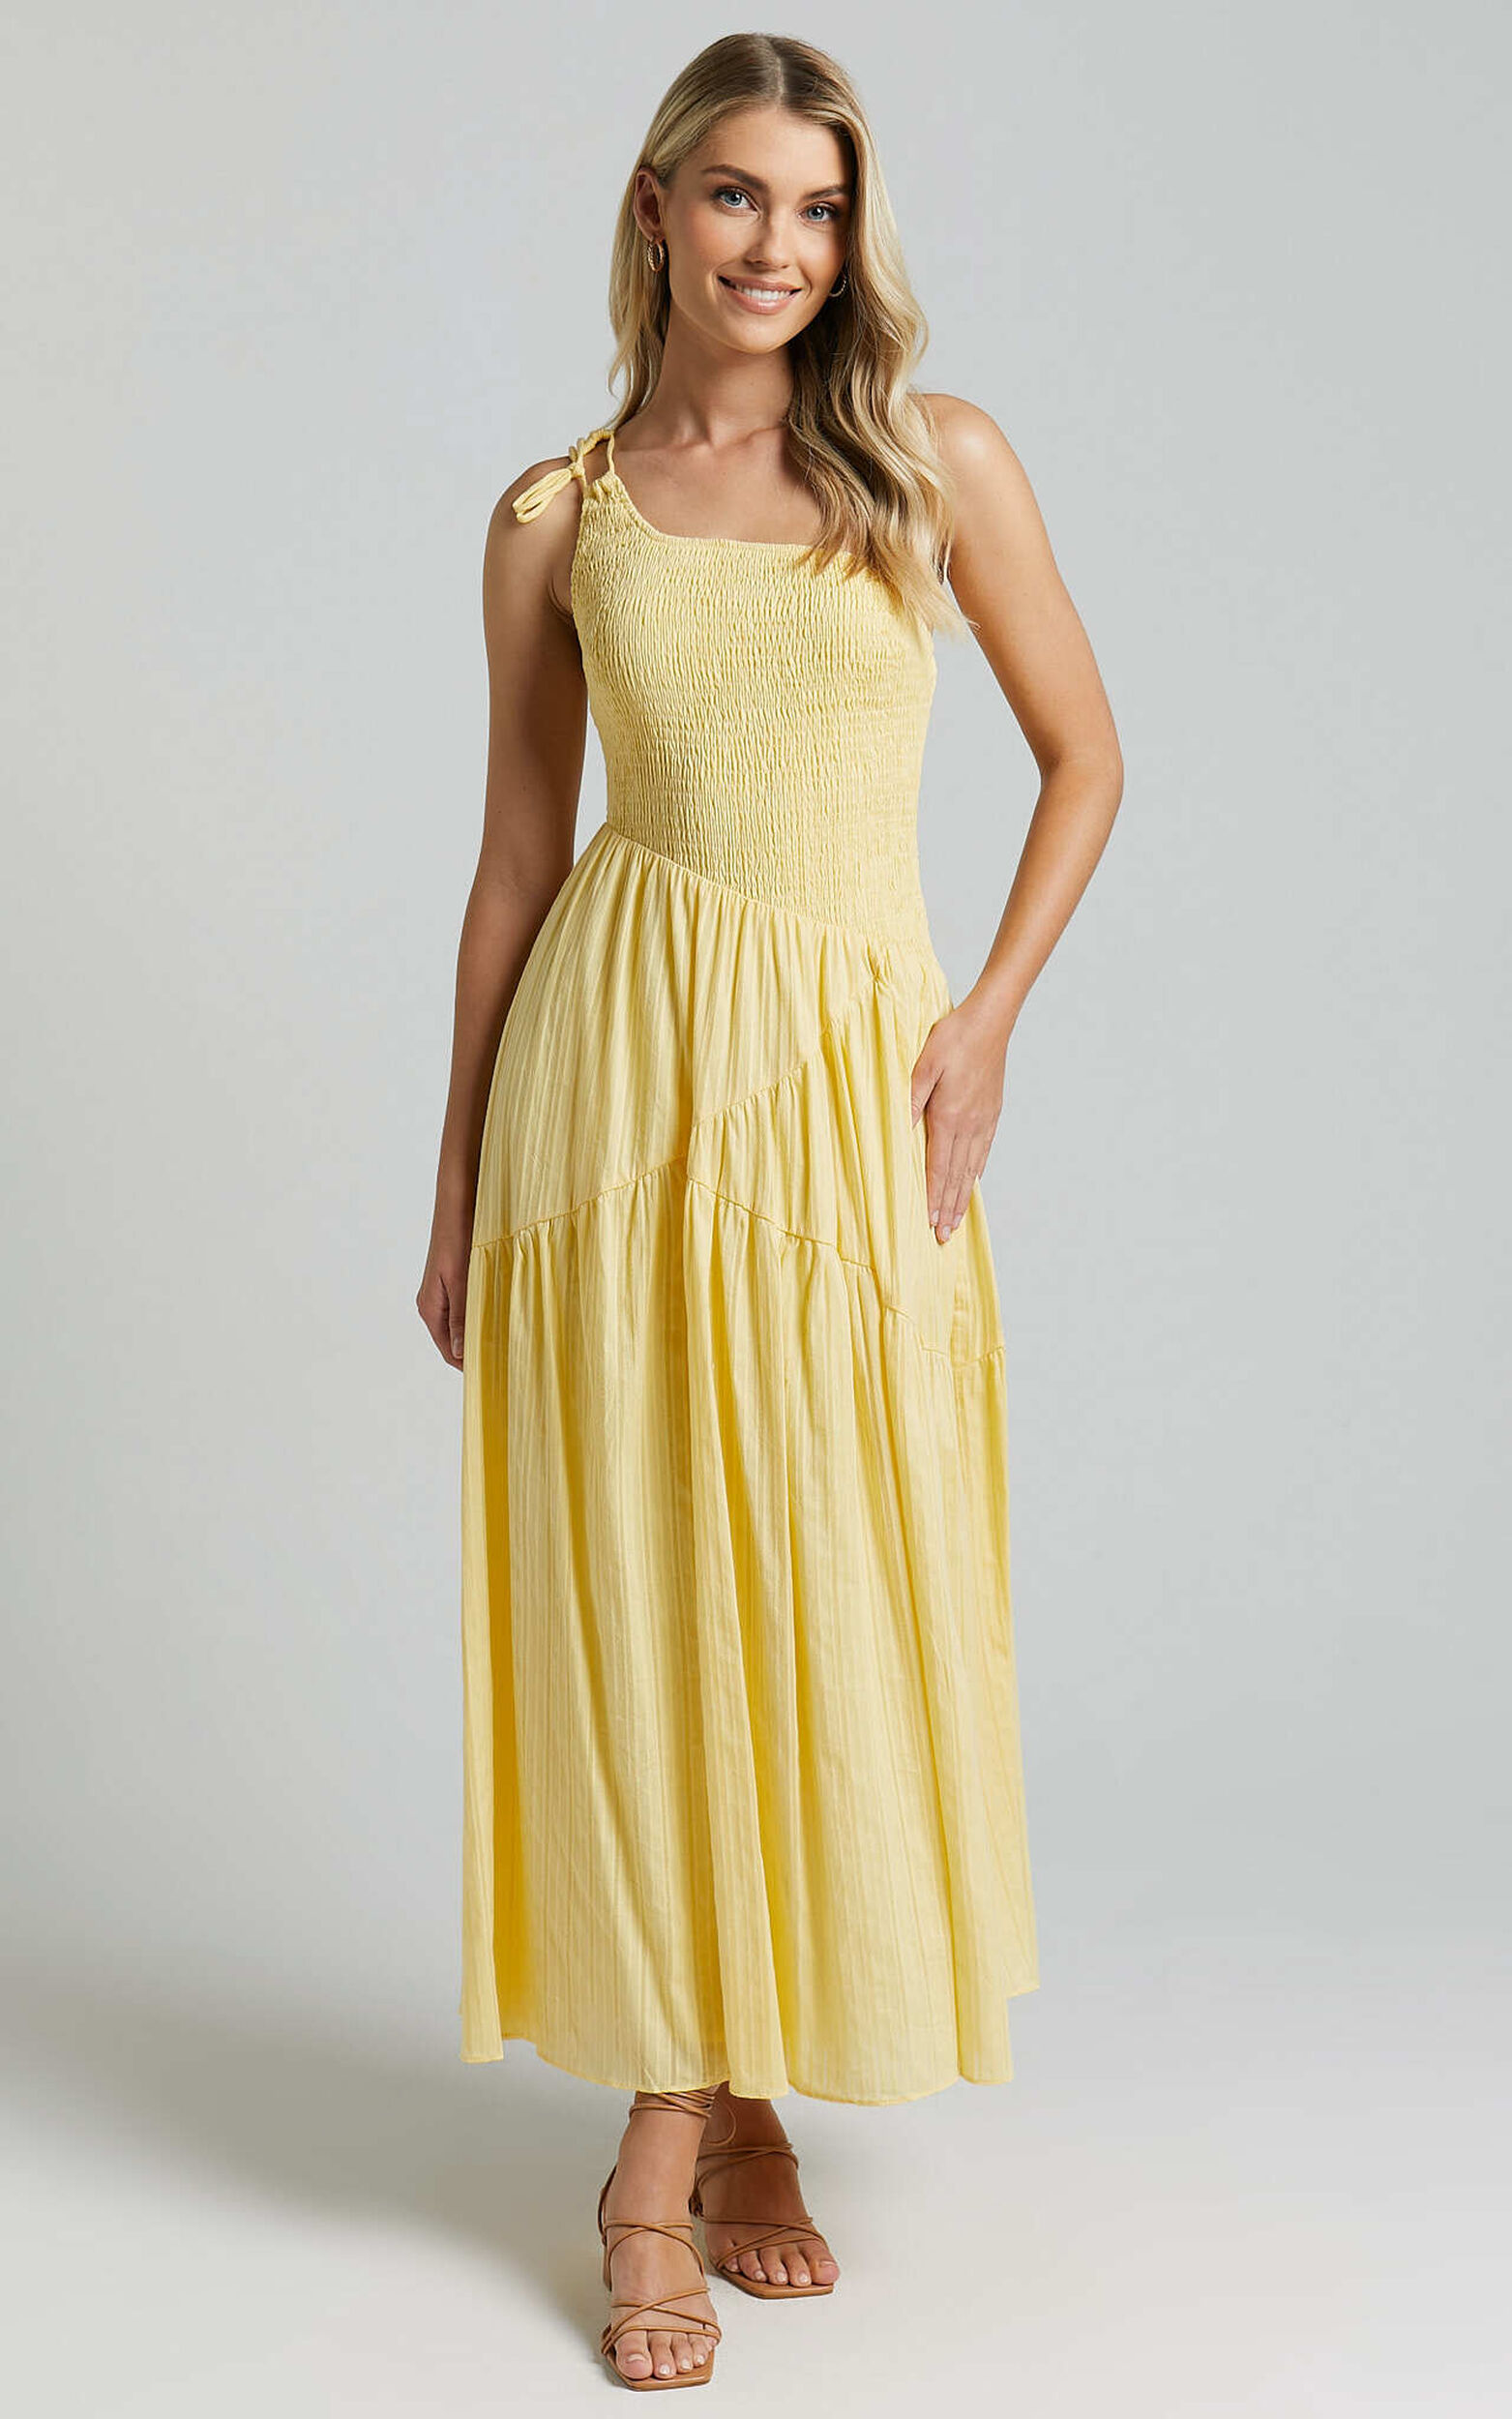 Zhibet Midi Dress - One Shoulder Tie Fit and Flare Dress in Yellow - 06, YEL1